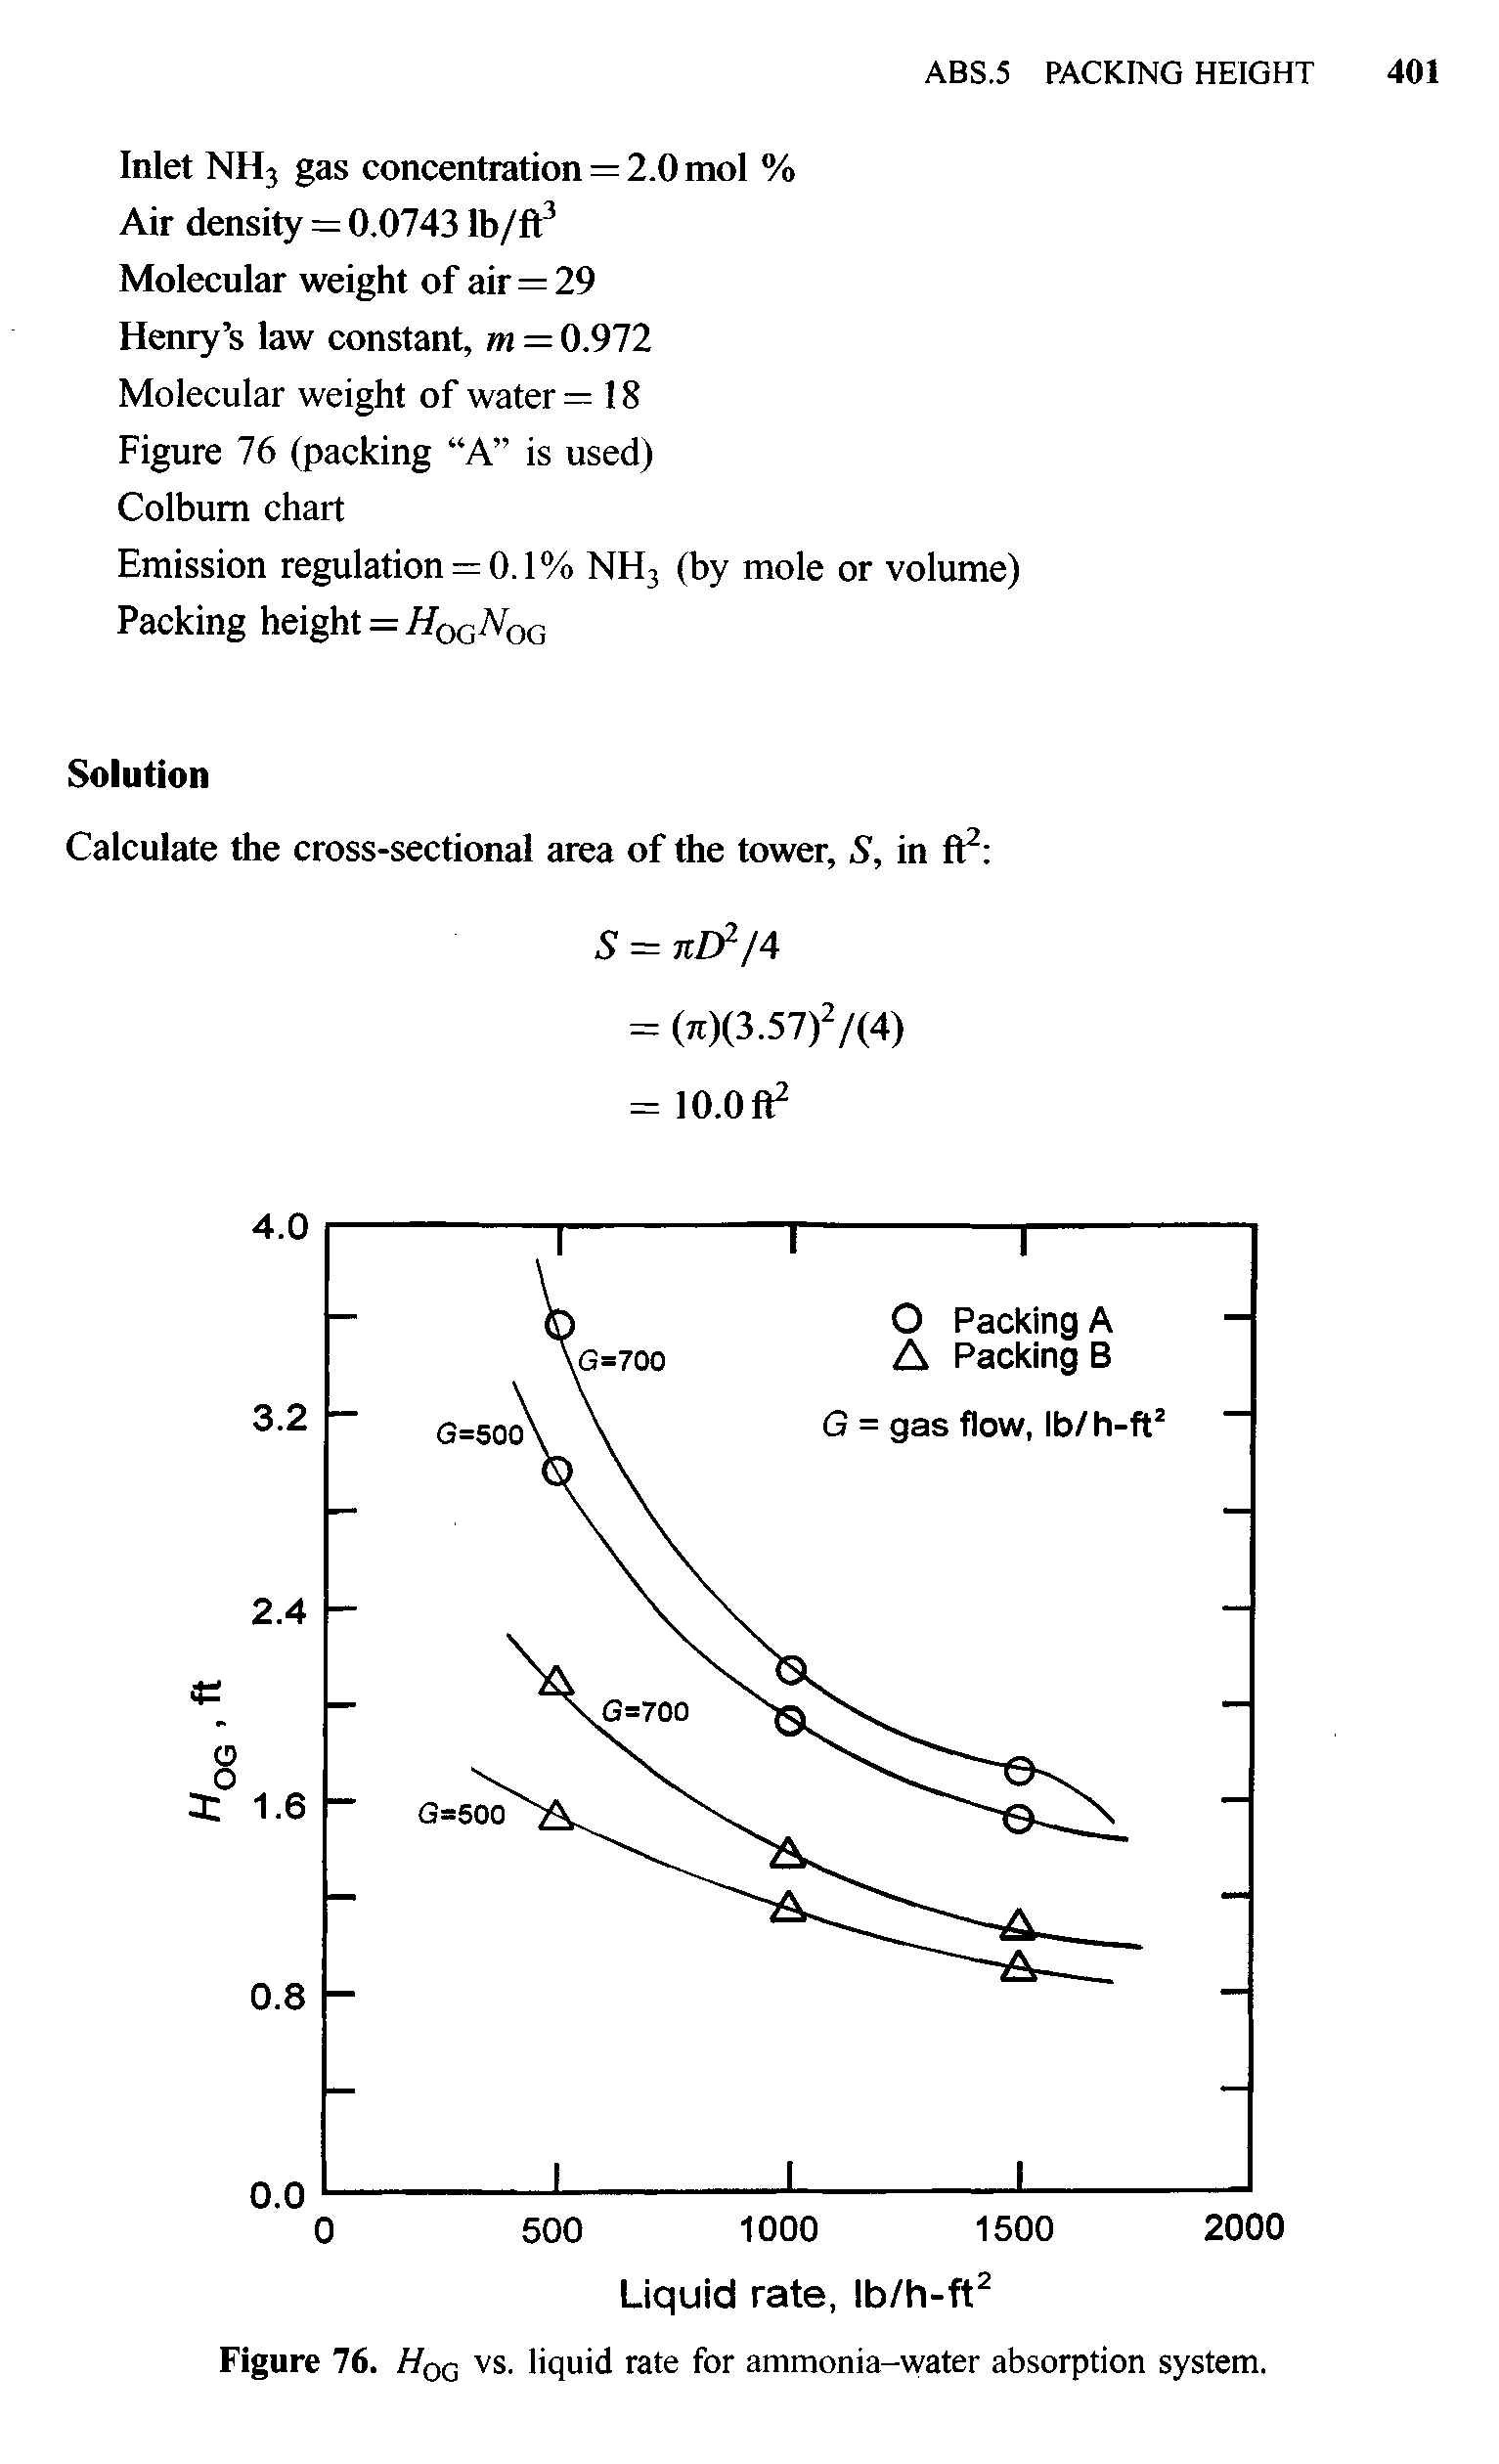 Figure 76. Hqq vs. liquid rate for ammonia-water absorption system.